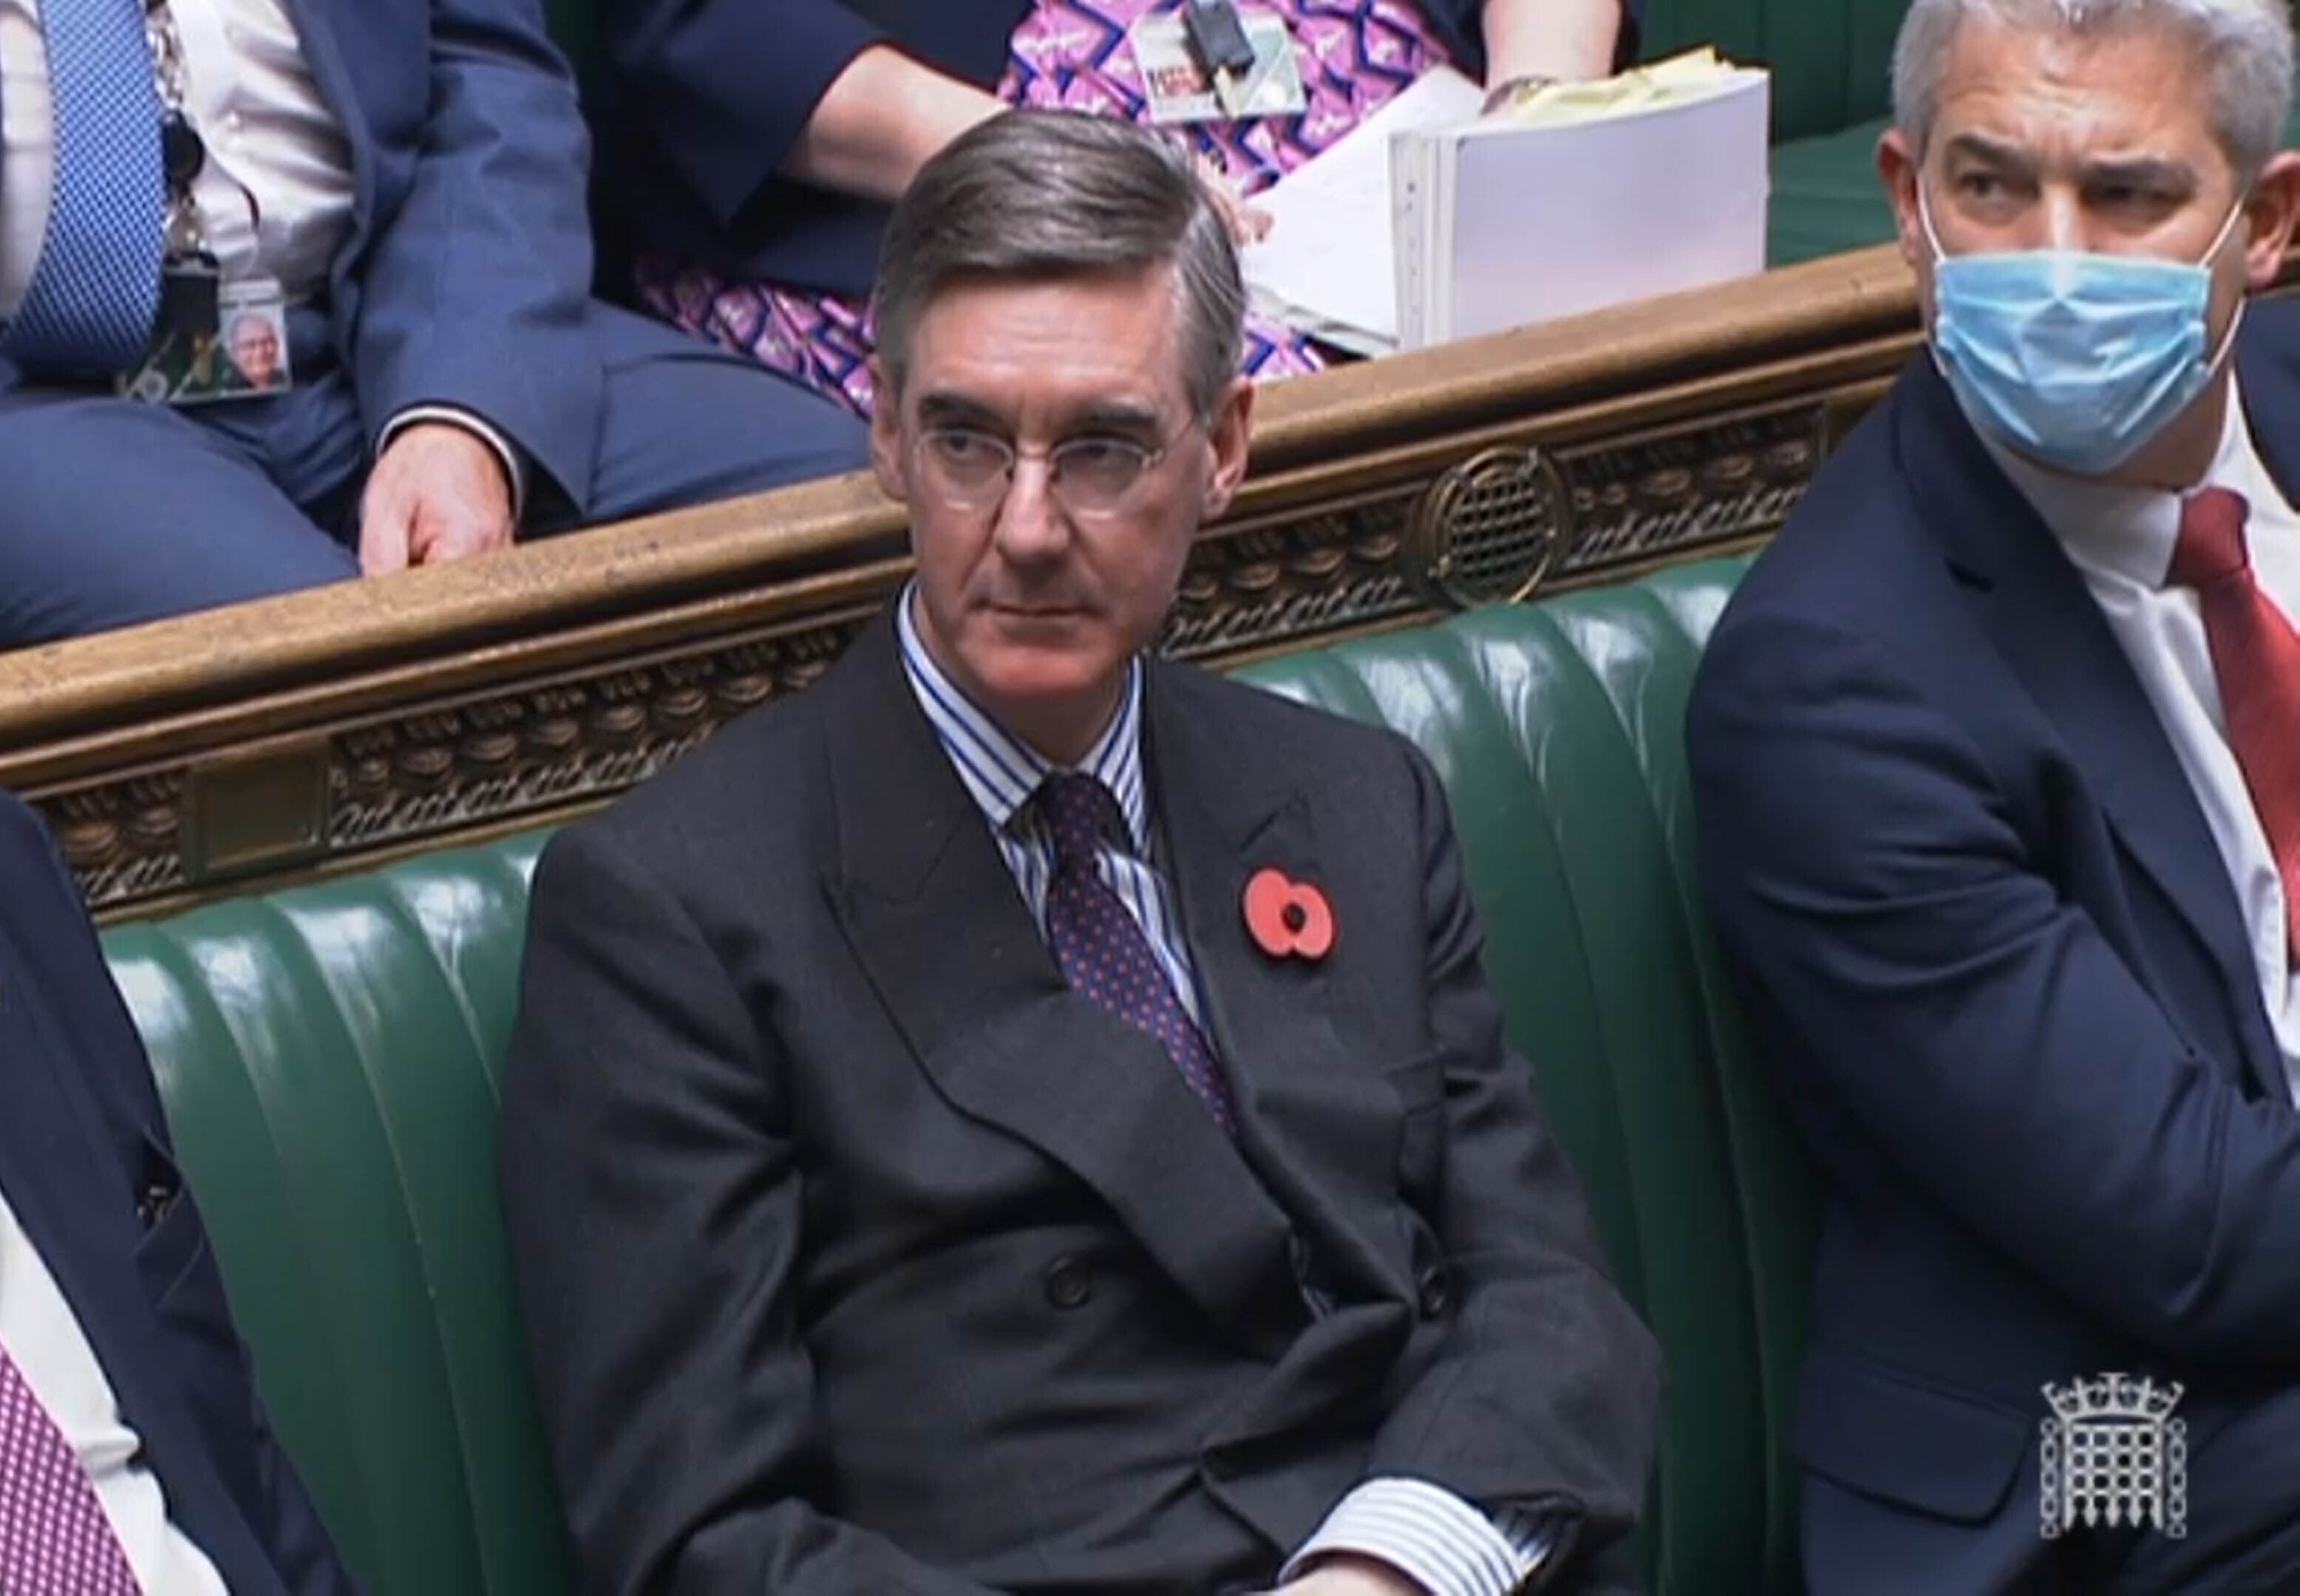 ‘Loans are not earnings and are not declarable in the register of interests,’ says Mr Rees-Mogg